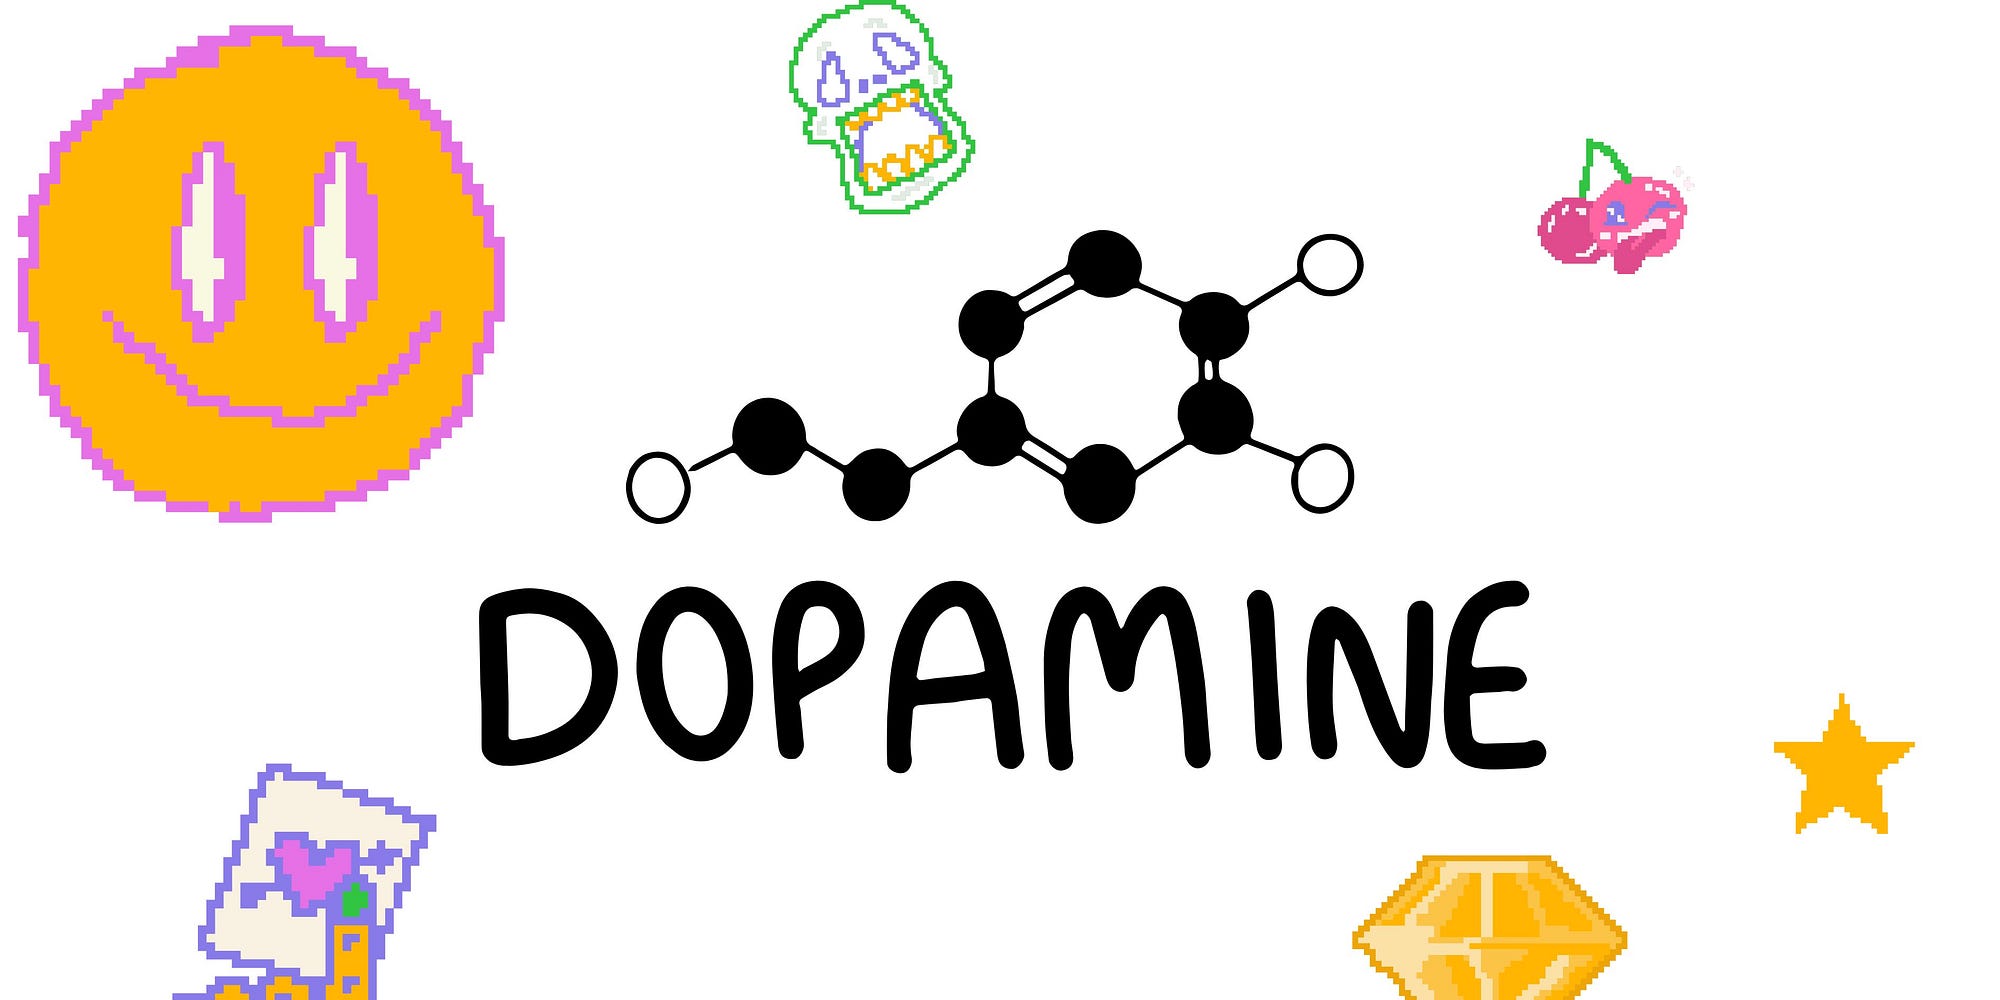 Dopamine can help your productivity, but what happens when there's